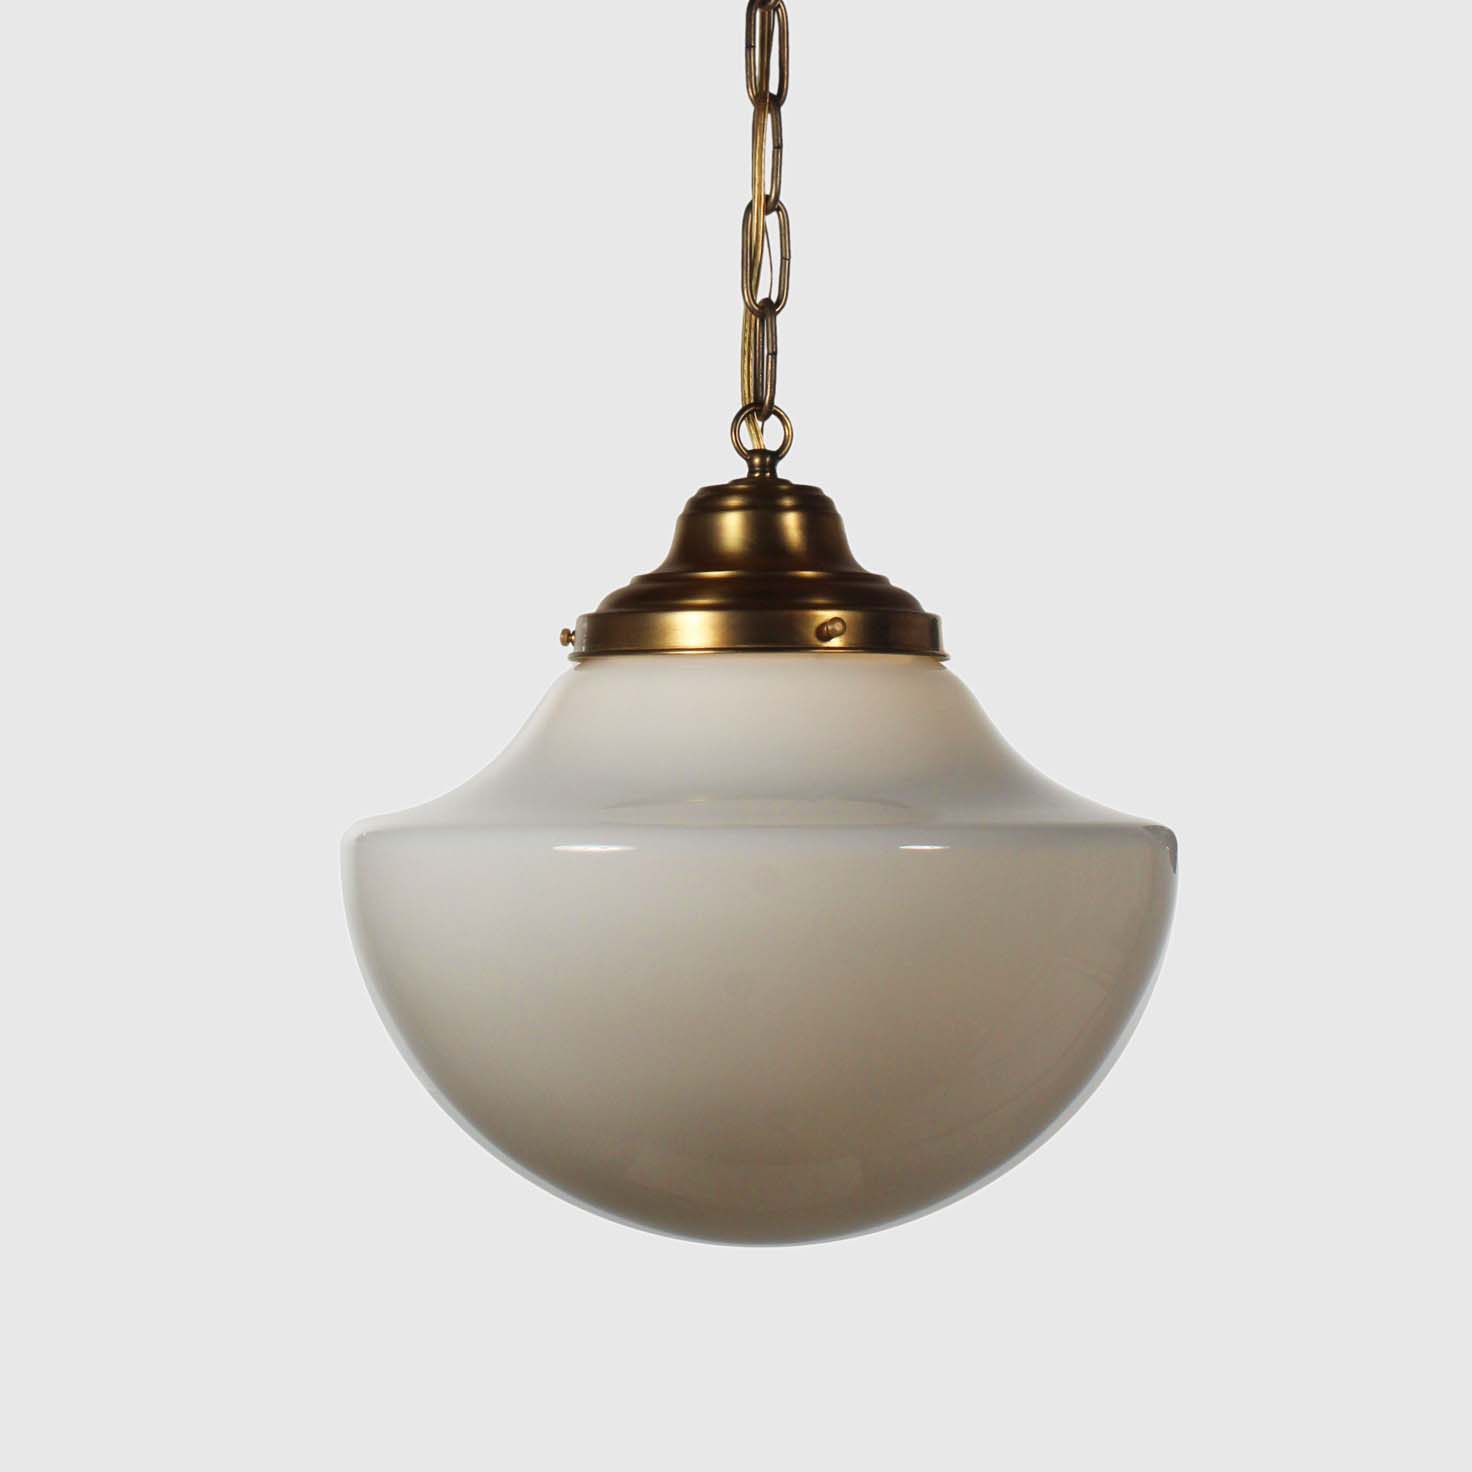 SOLD Antique Schoolhouse Light Pendant with Glass Globe-67582